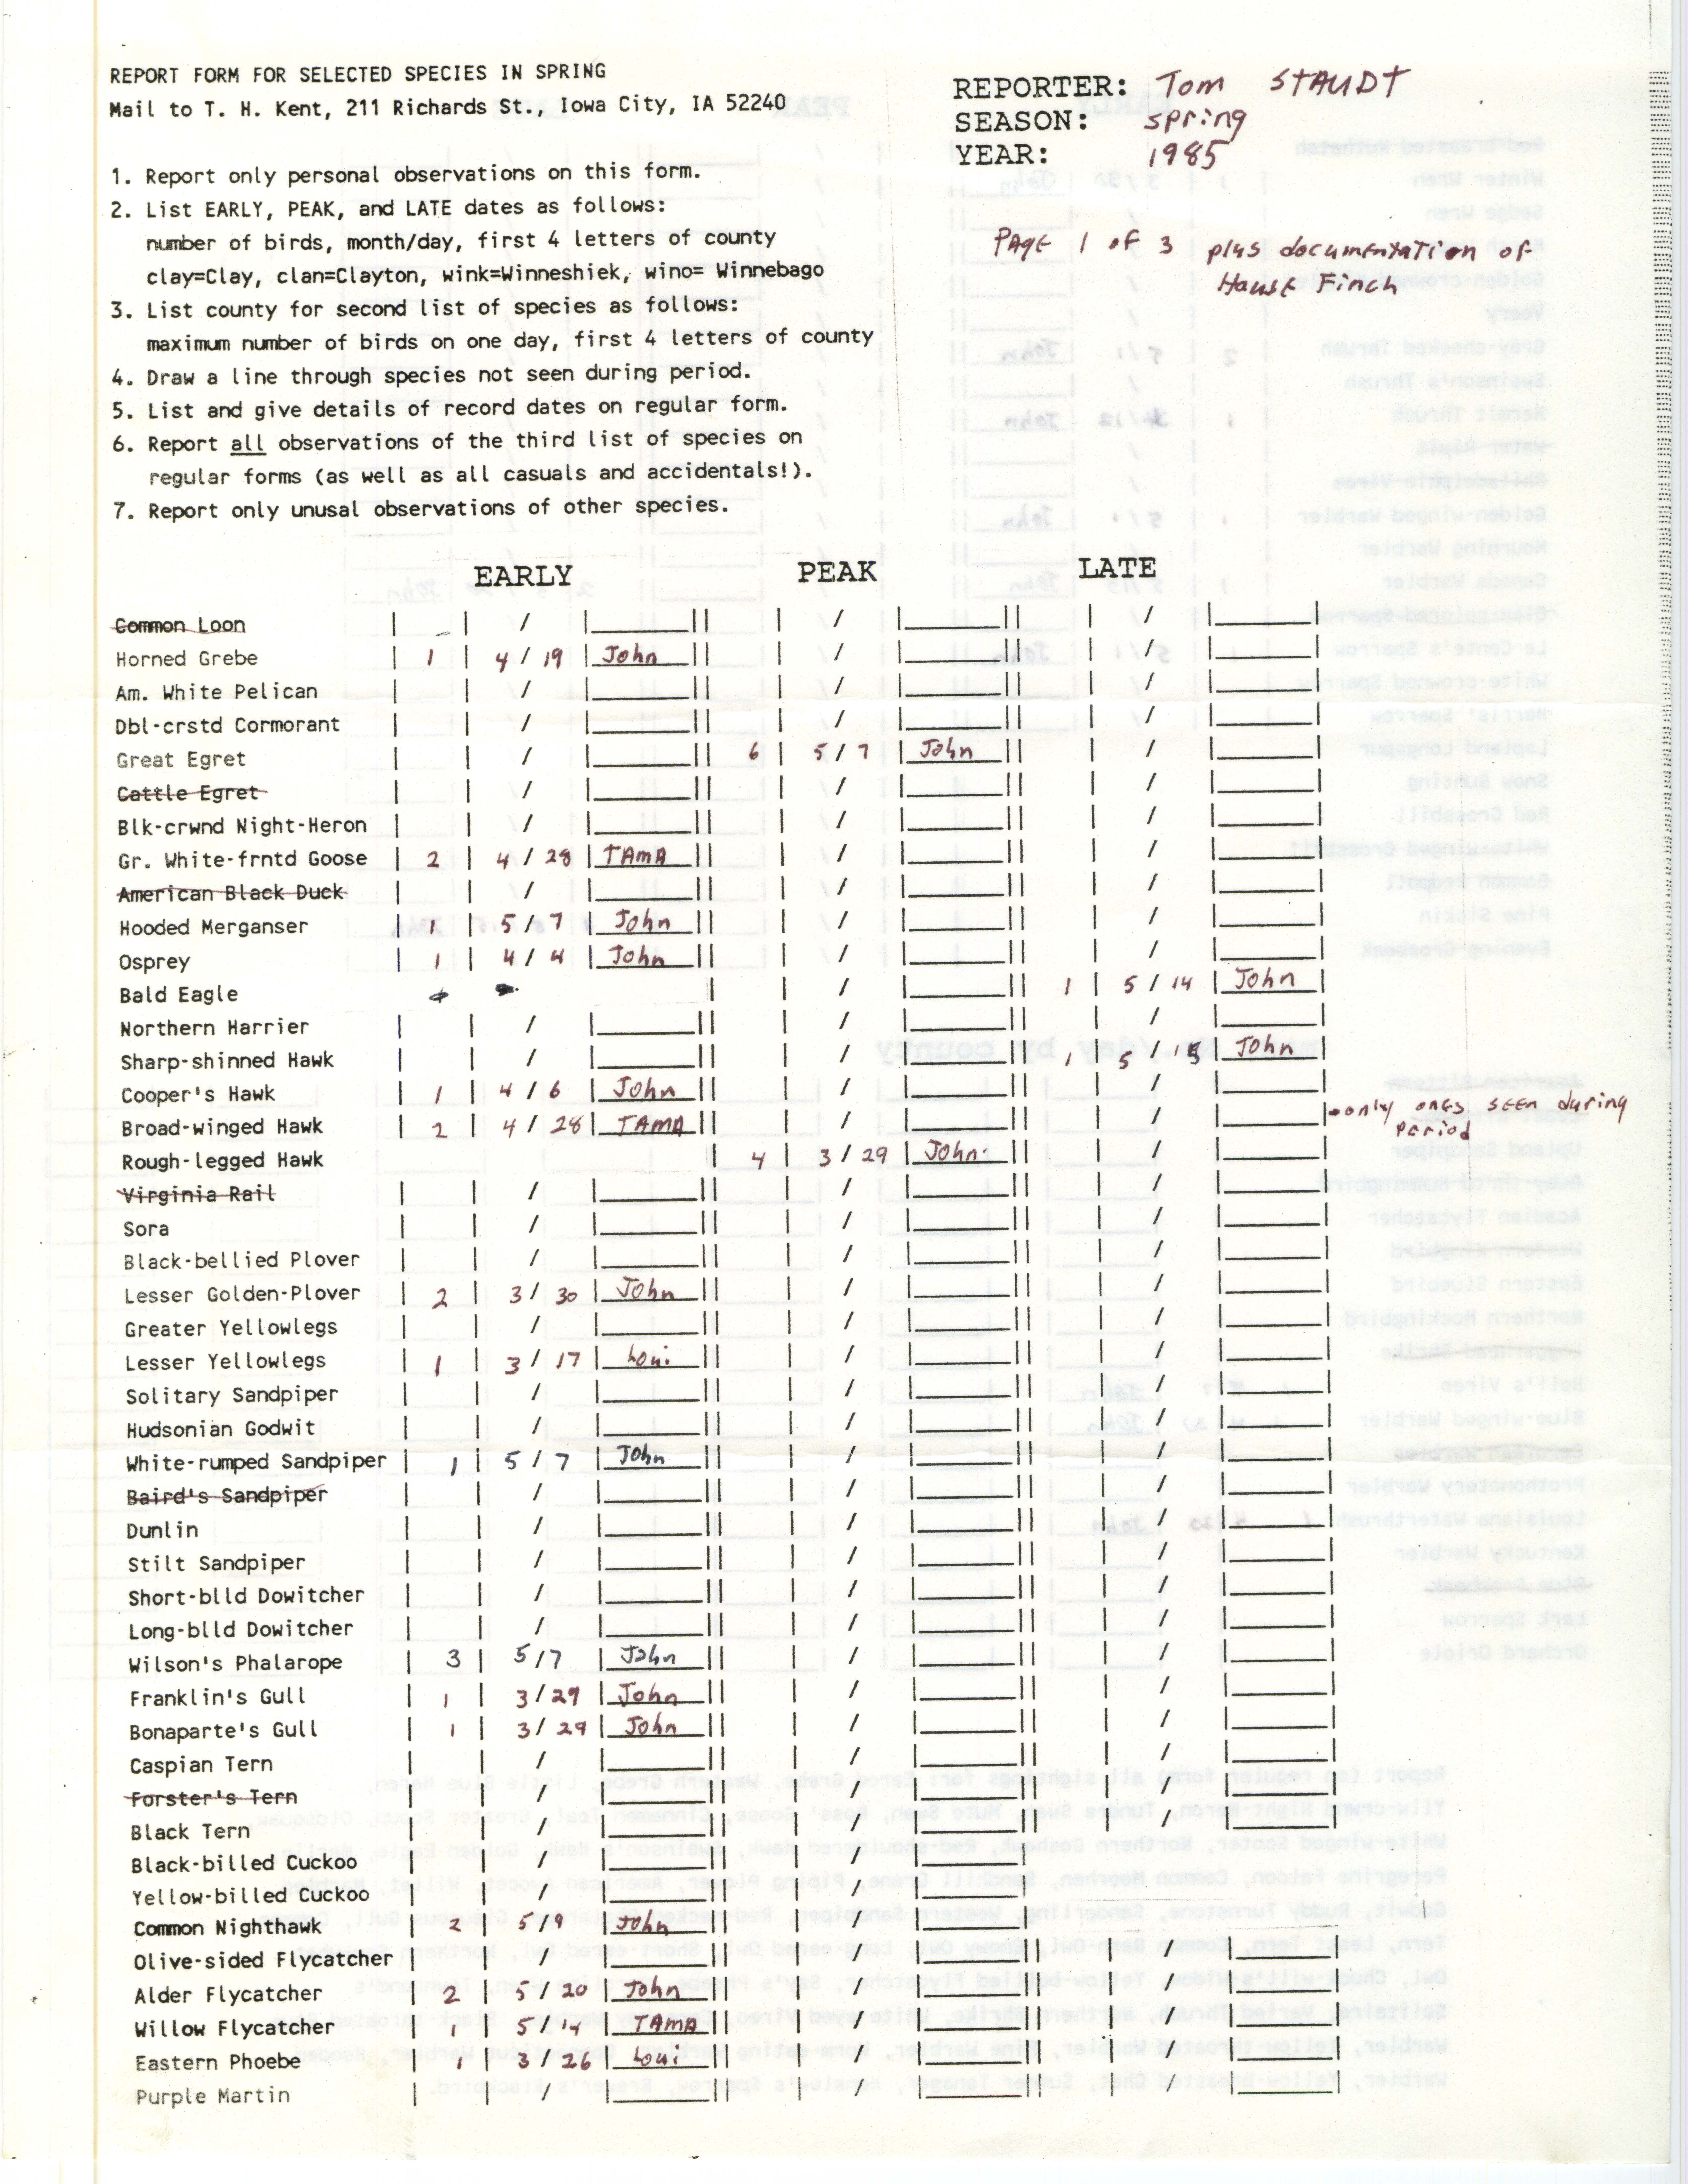 Report form for selected species in spring, contributed by Thomas J. Staudt, spring 1985